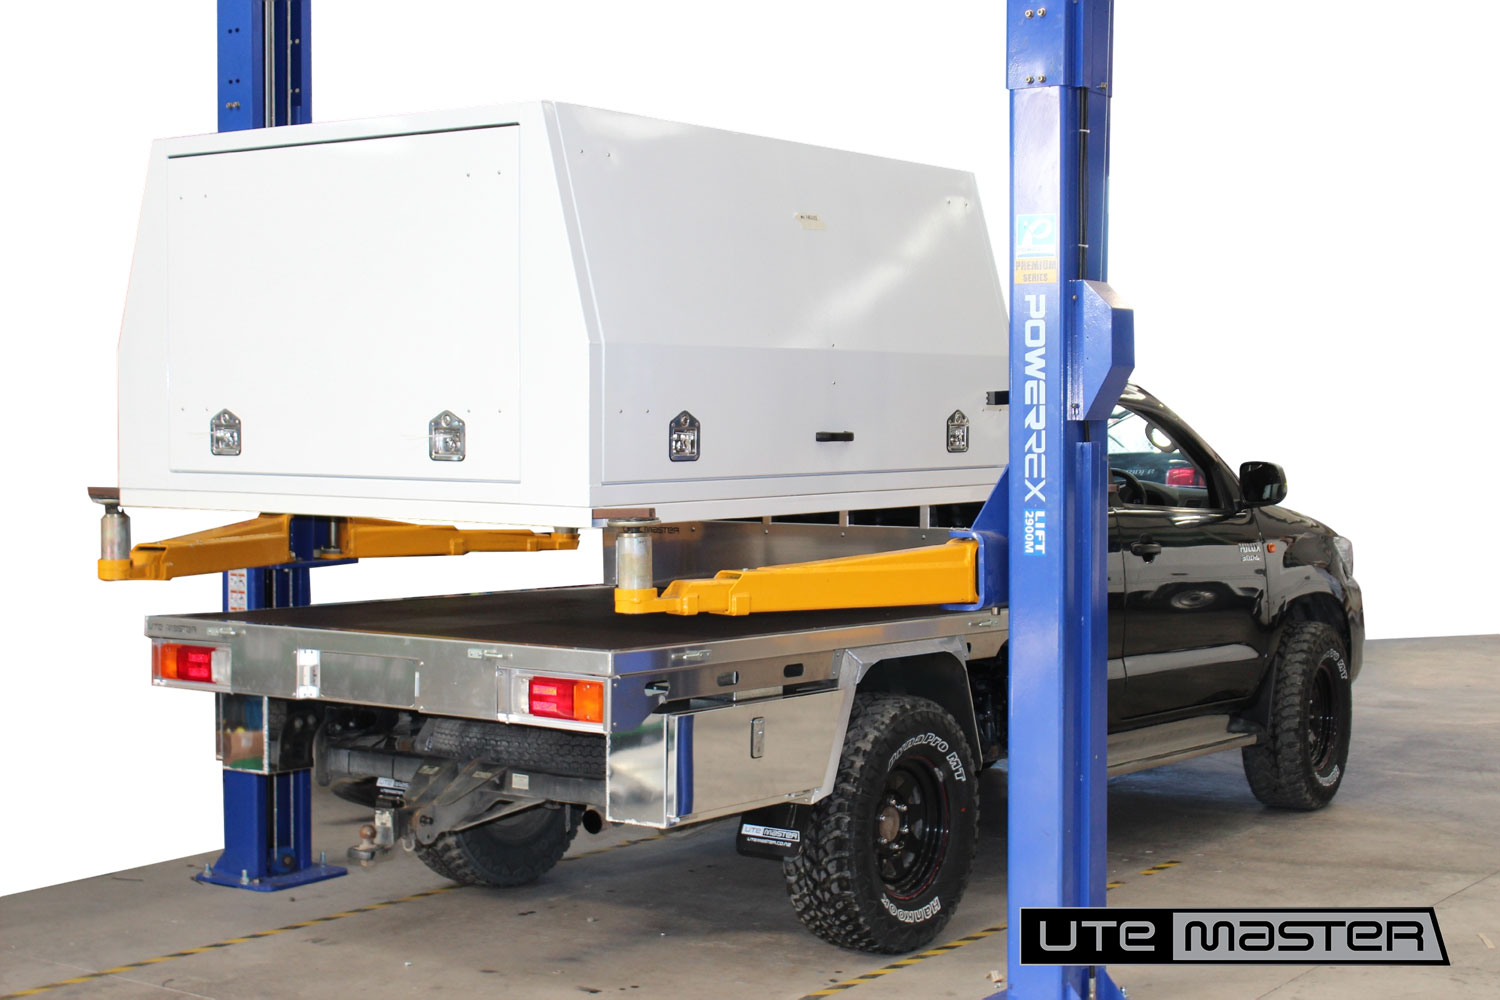 Flat Deck lift off Service Body Utemaster Commercial fitout box body